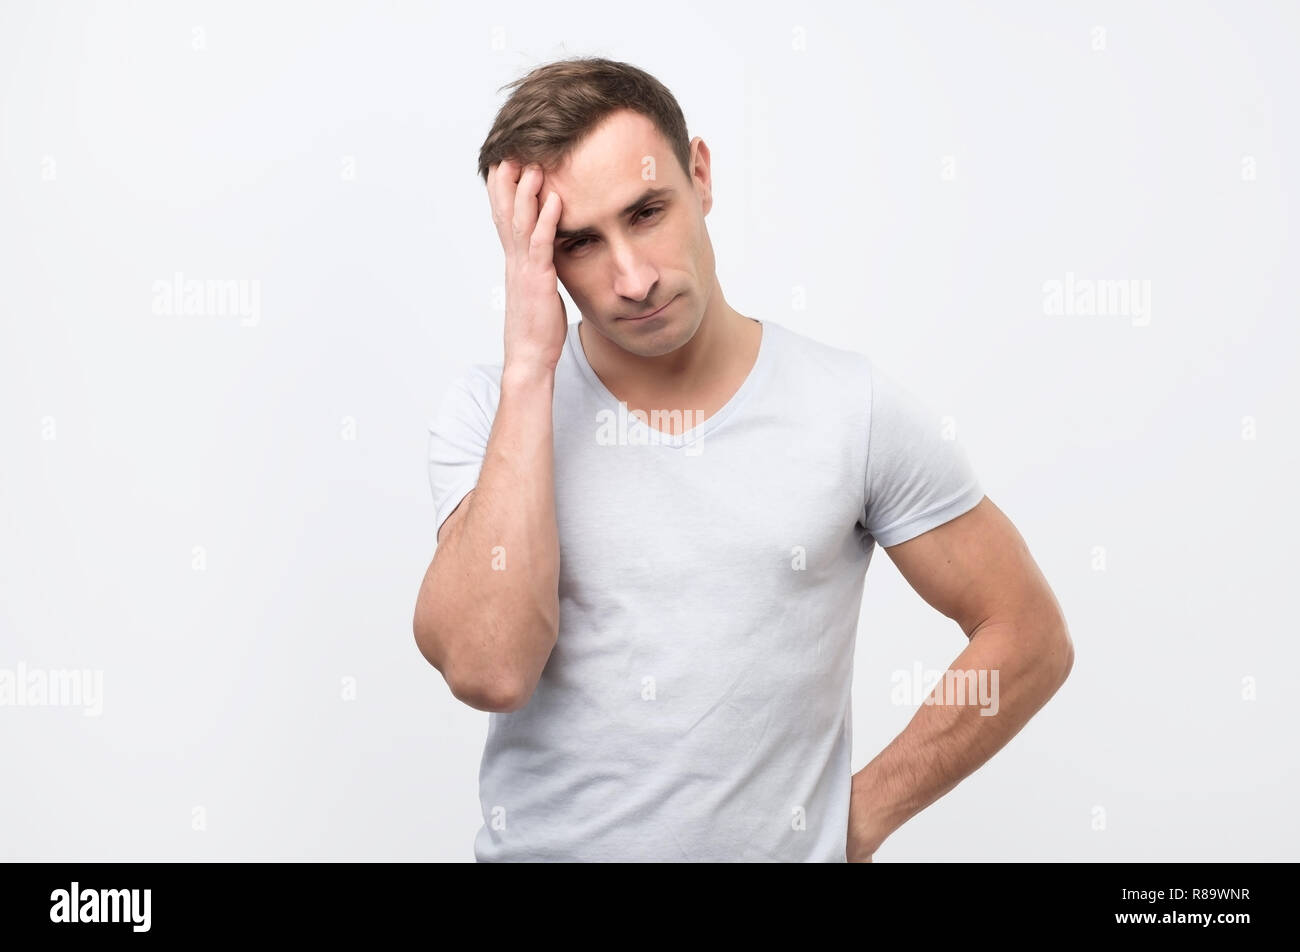 Serious italian male has attentive look, keeps hand on head, looking down. Stock Photo